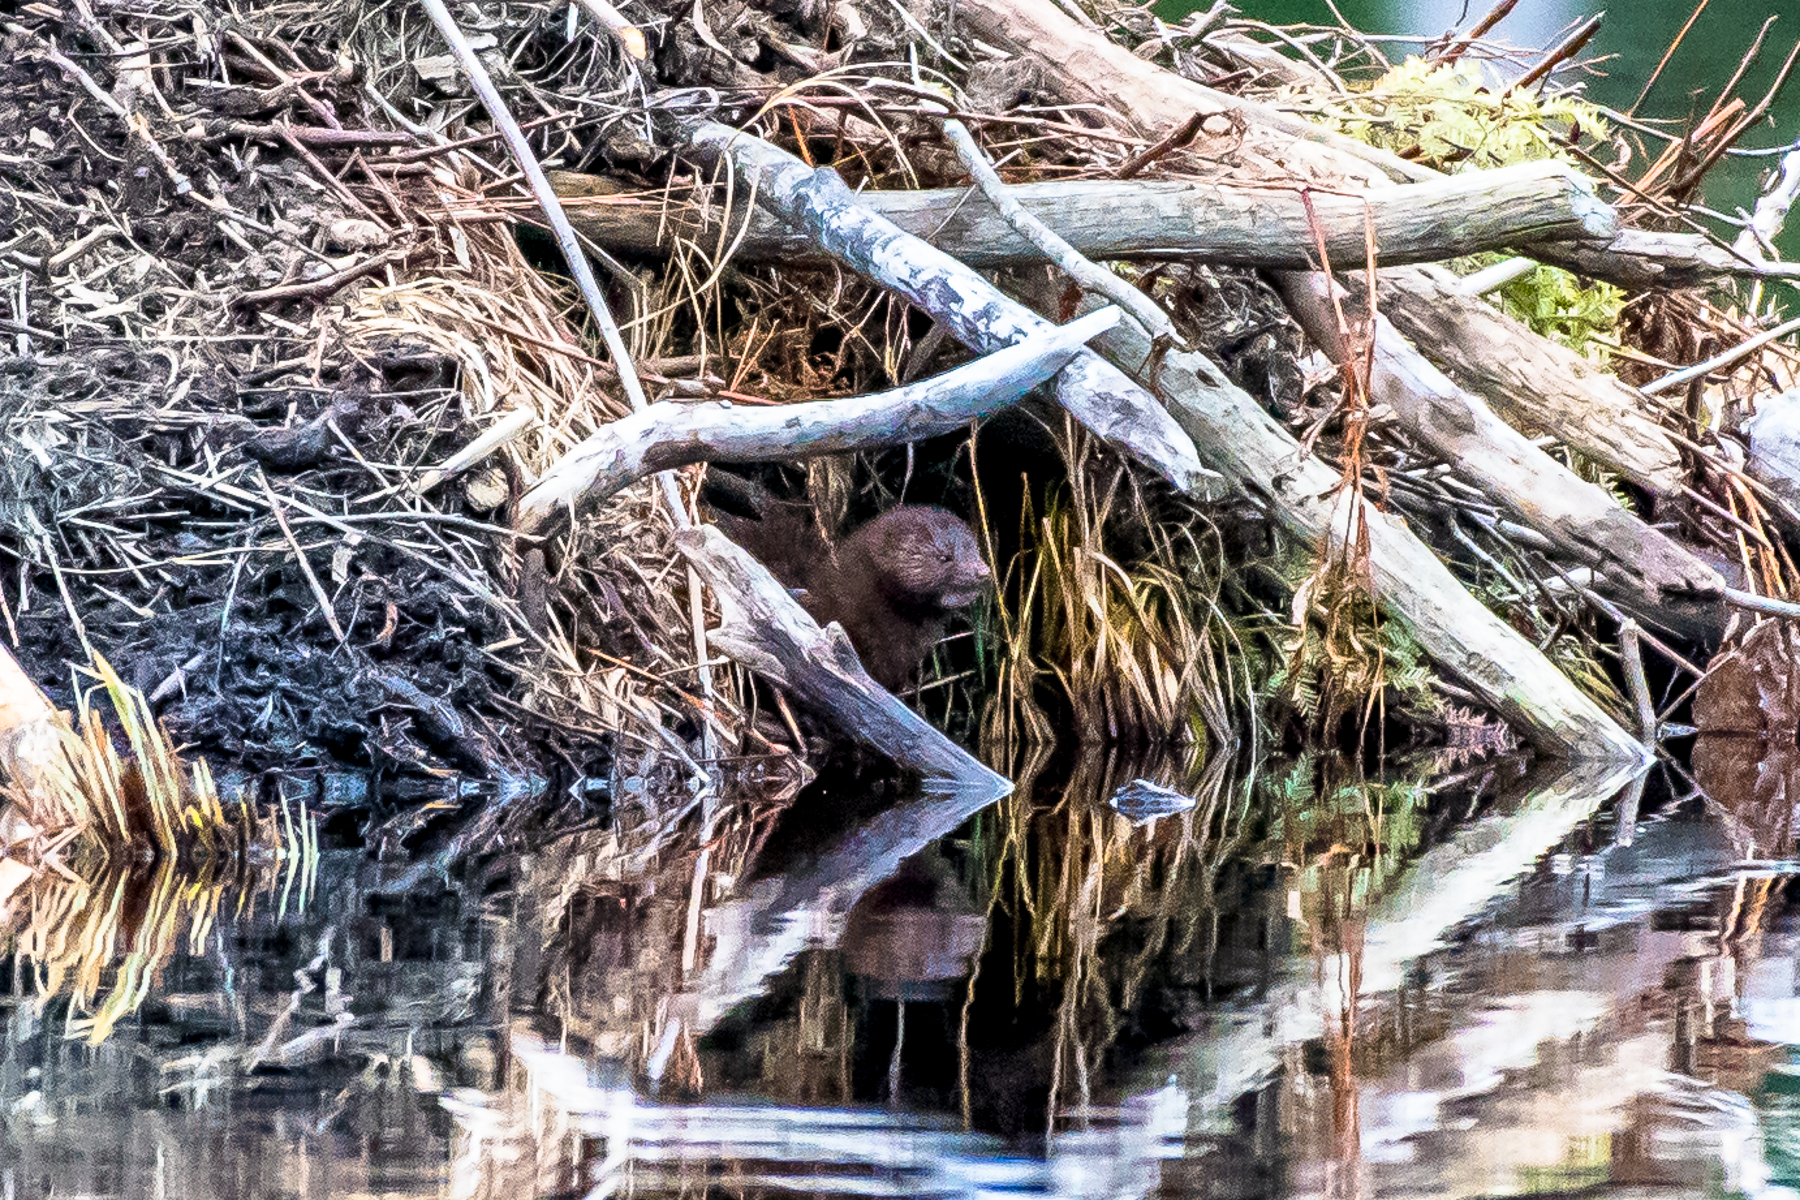   I watched a mink swim across a pond and hang out on a beaver lodge. Notice the small patch of white fur under his chin. He was there for about 15 minutes before moving on. &nbsp;3/23/16  